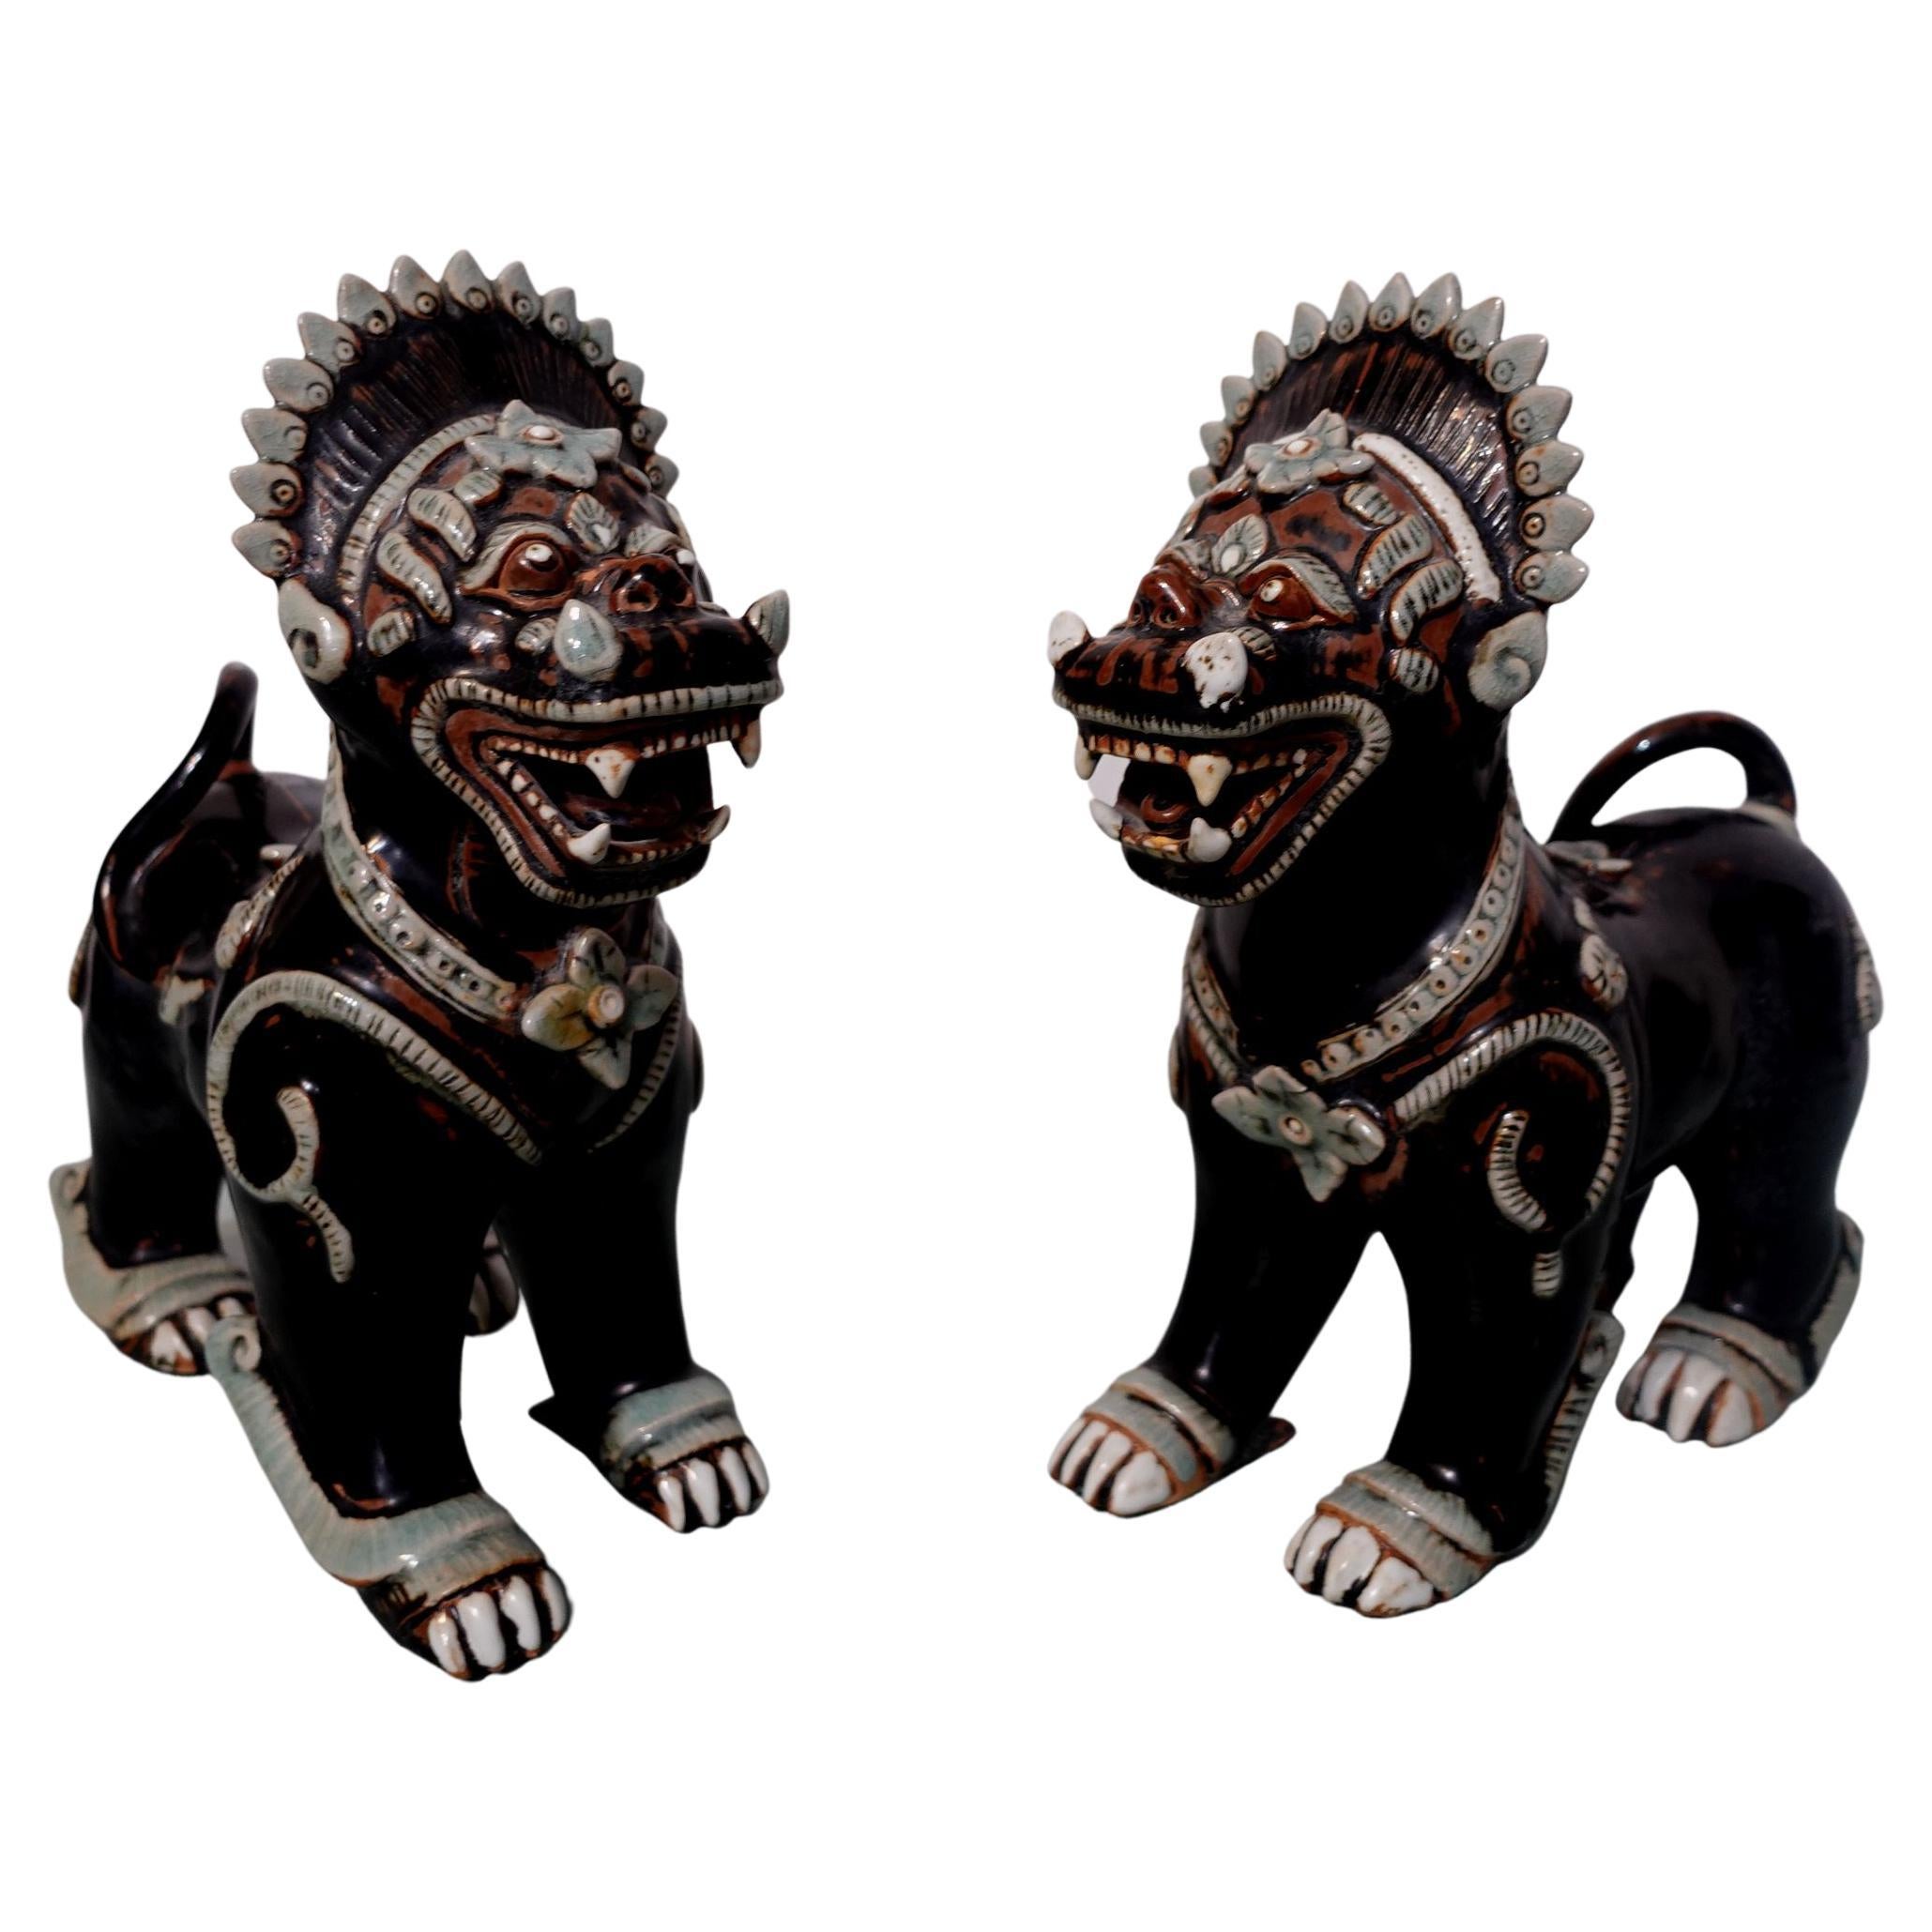 Super quality Antique, Large Pair of Porcelain Noire Glaze Foo Lions/Dogs from the 19th century of China.
Quality work, artistic creation by a high skillful artist. Beautiful and simple colors with a delicate combination of details made this